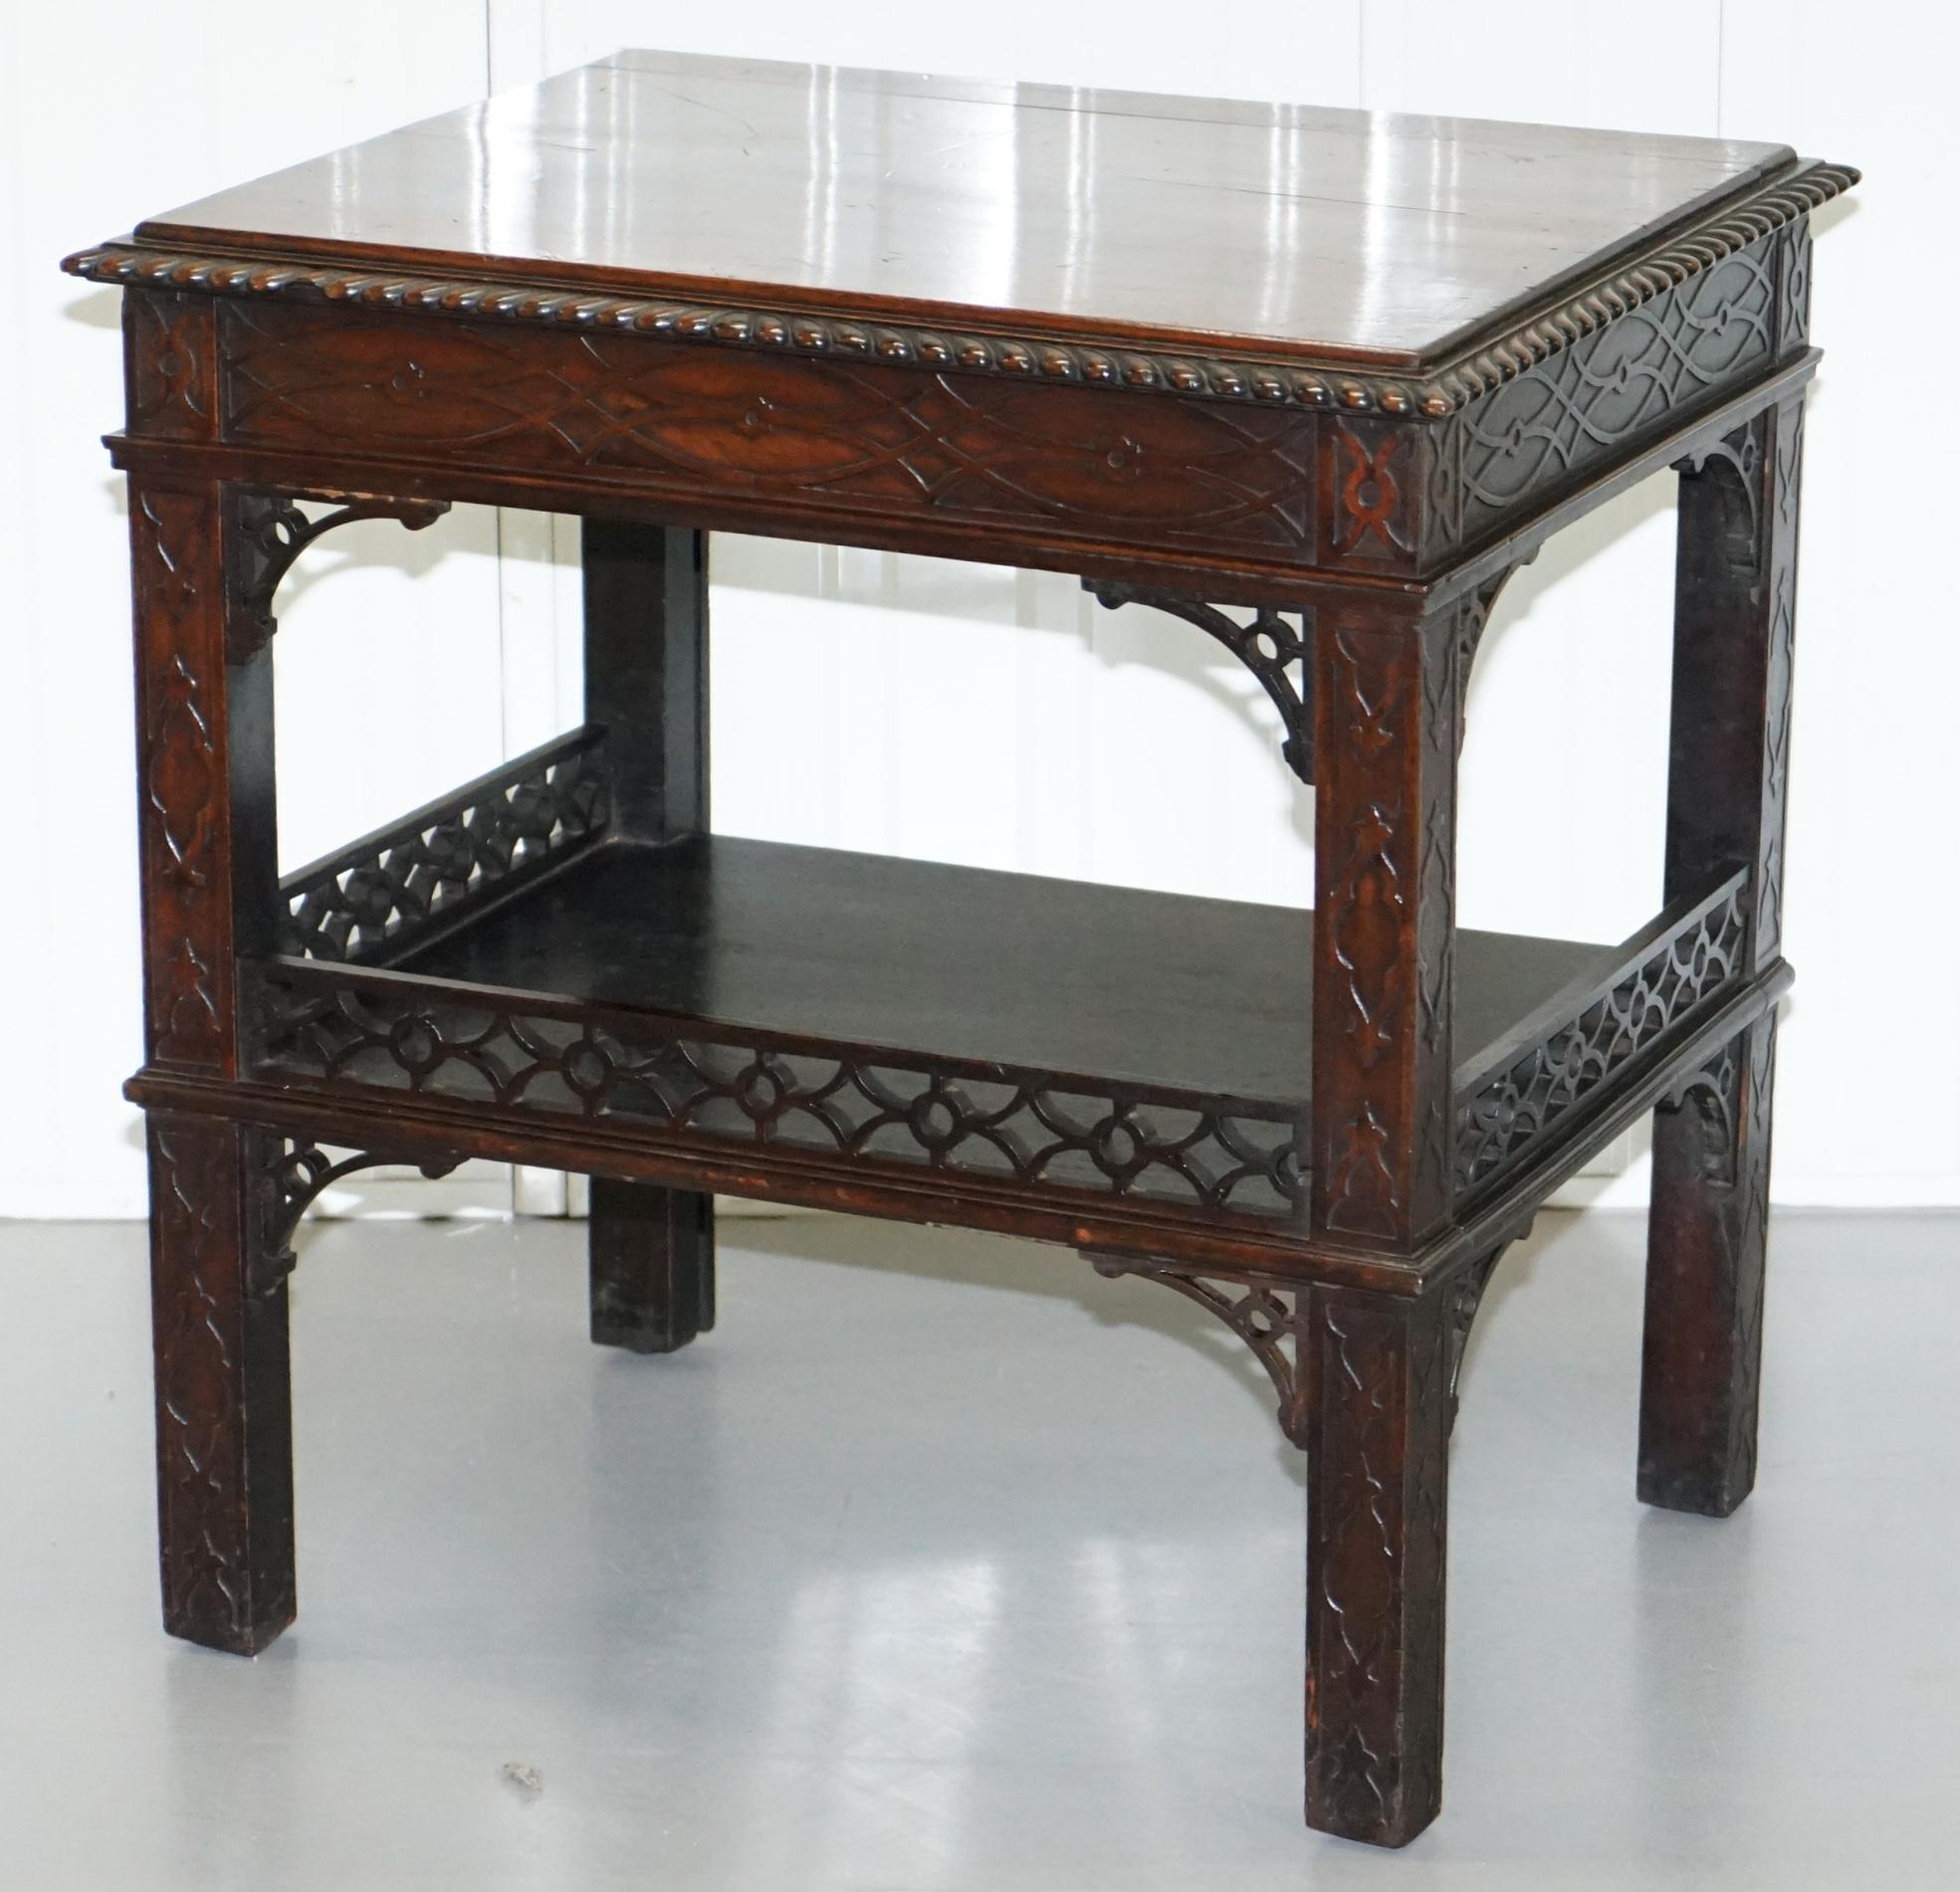 Hand-Crafted 19th Century Thomas Chippendale Fret Work Carved and Pierced Occasional Table For Sale